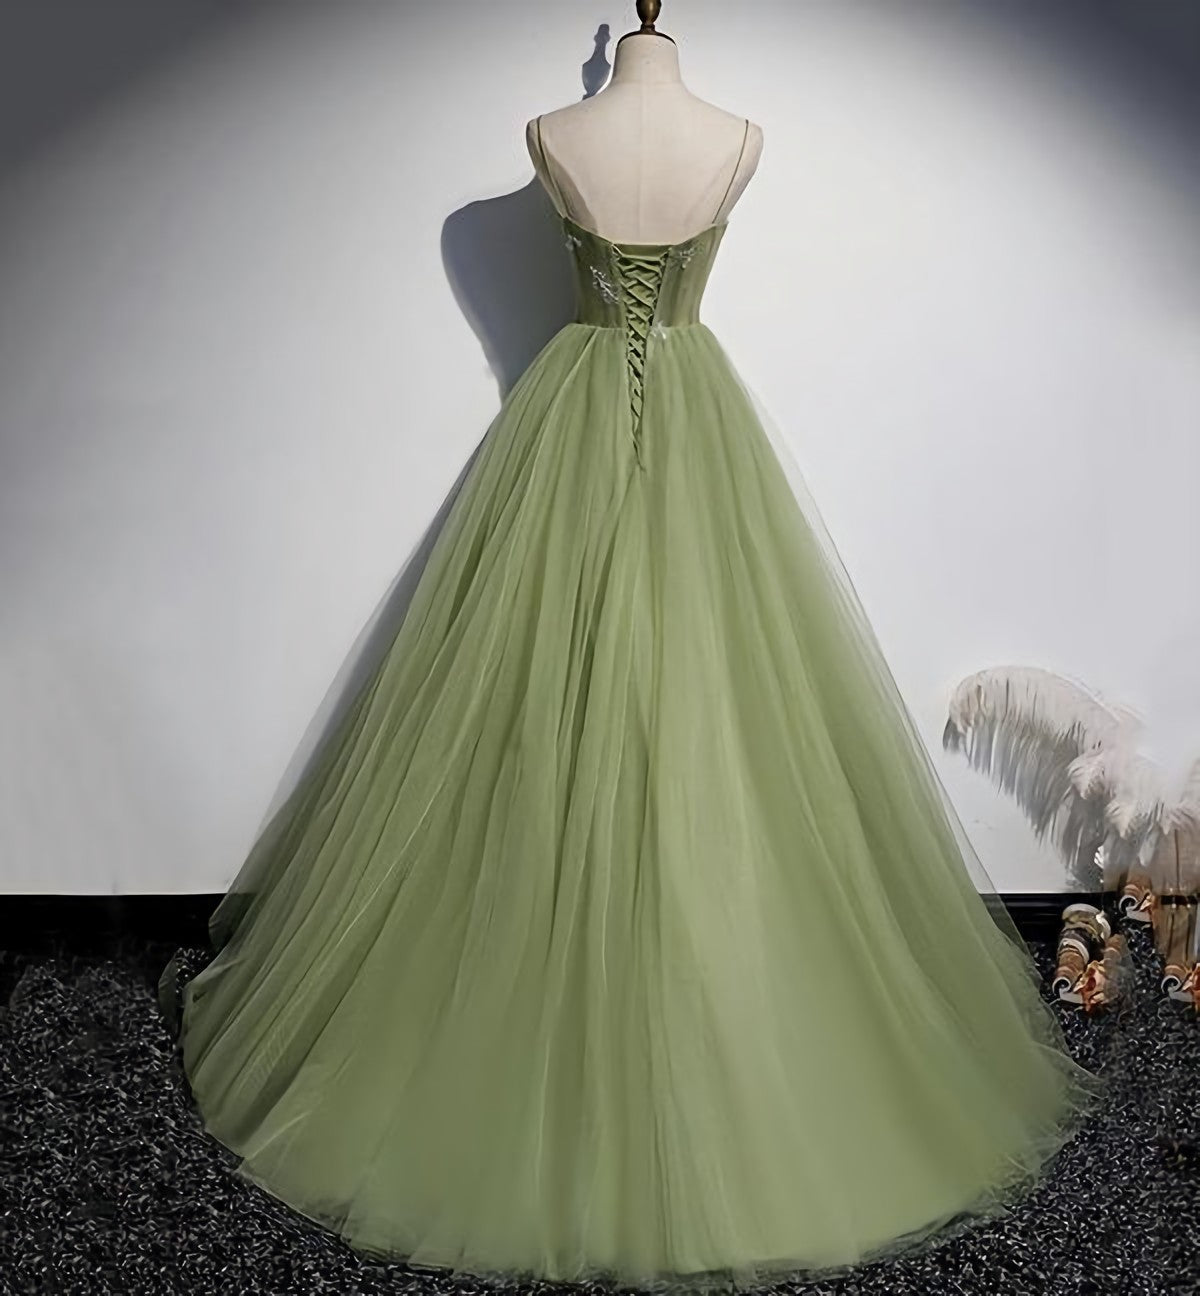 Party Dress Night Out, Green Tulle Long Sweet 16 Prom Dress Formal Dress, Evening Gown